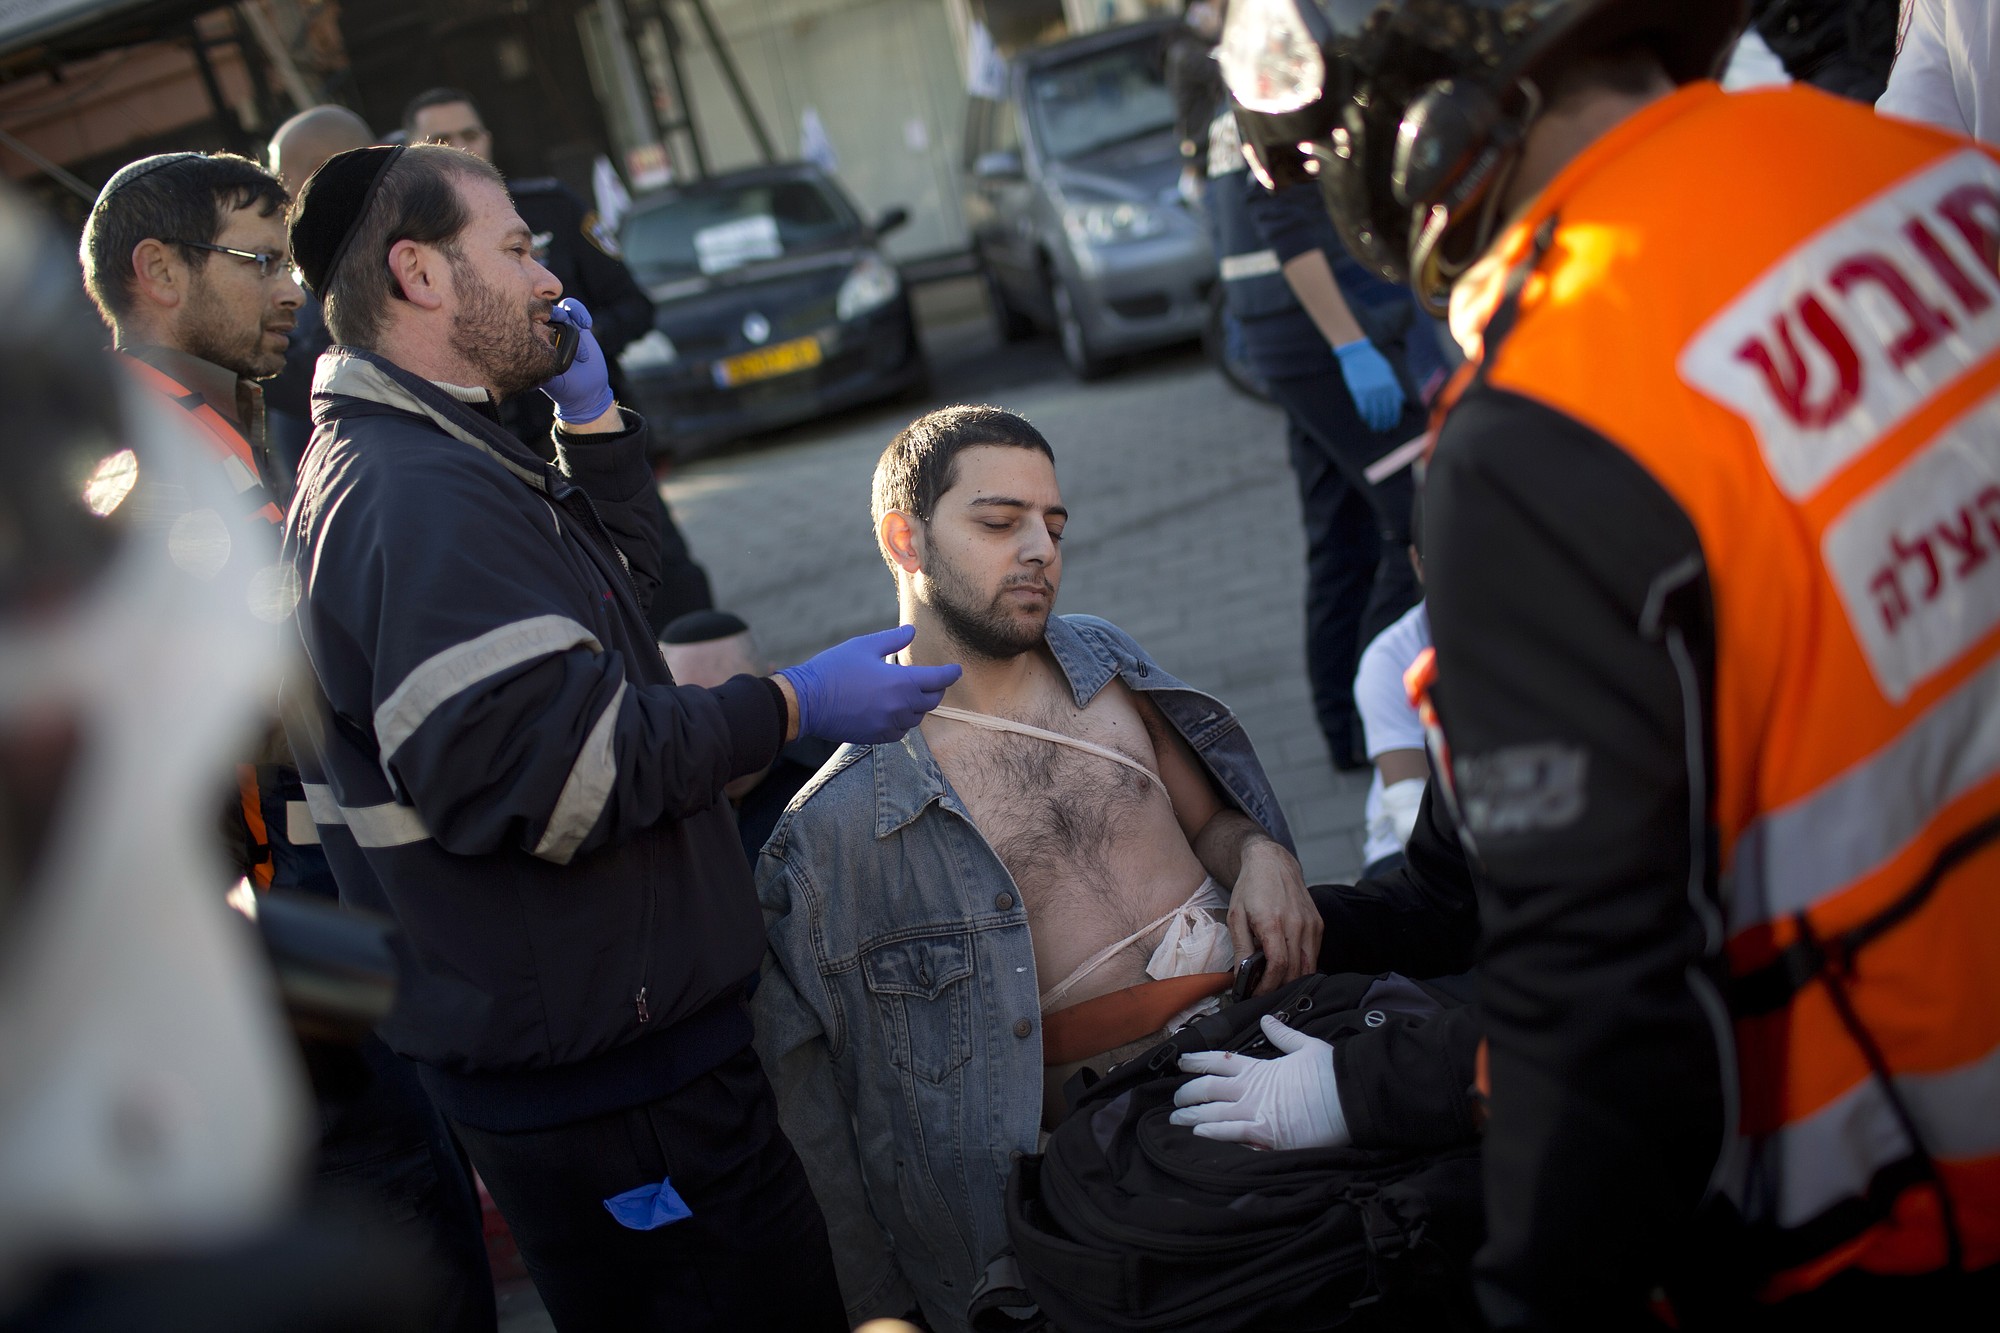 An injured man is treated by paramedics at the scene of a stabbing in Tel Aviv, Israel, on Wednesday.